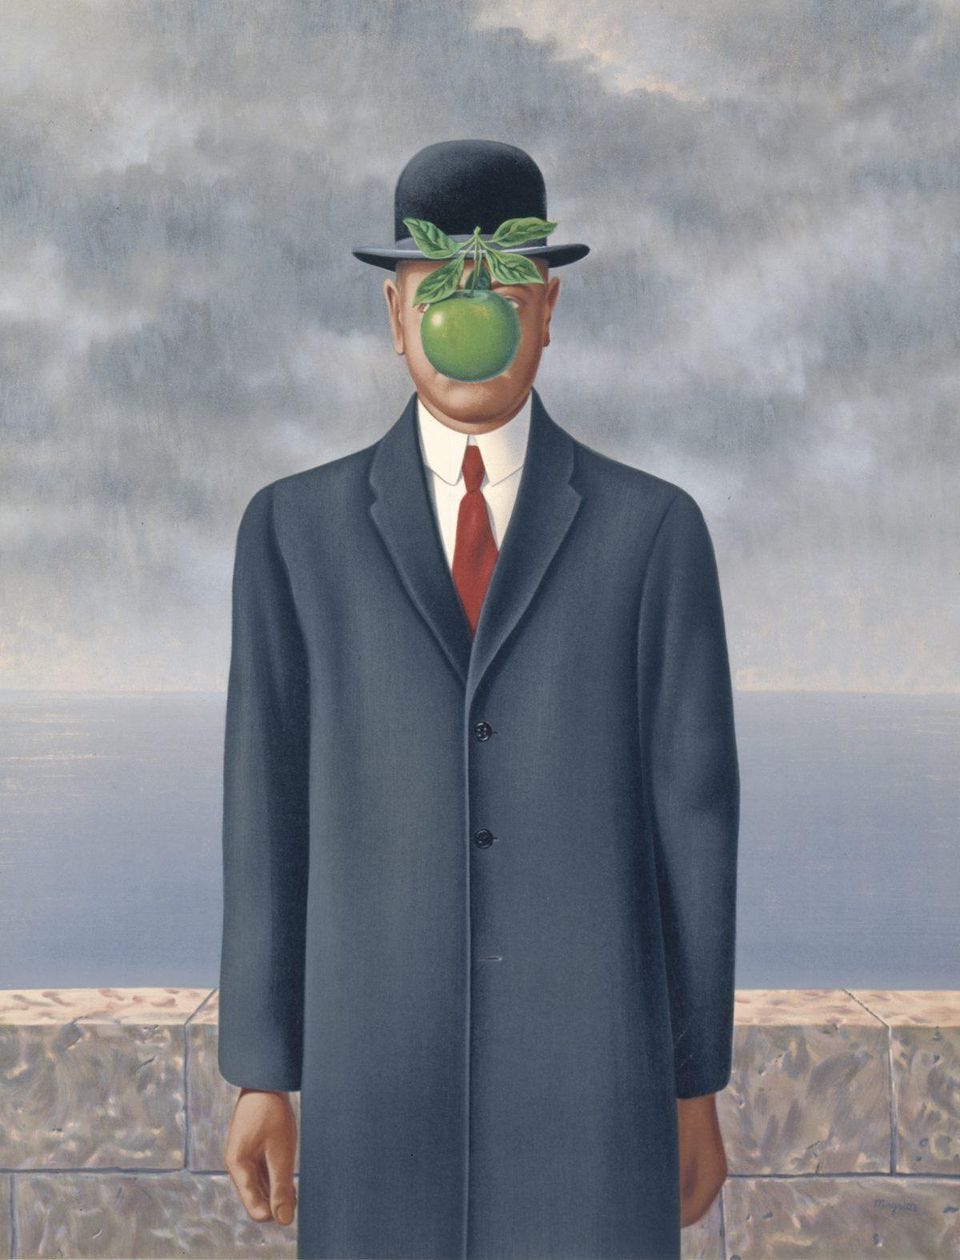 The Son of Man: Magritte's Famous Contribution to Surrealism